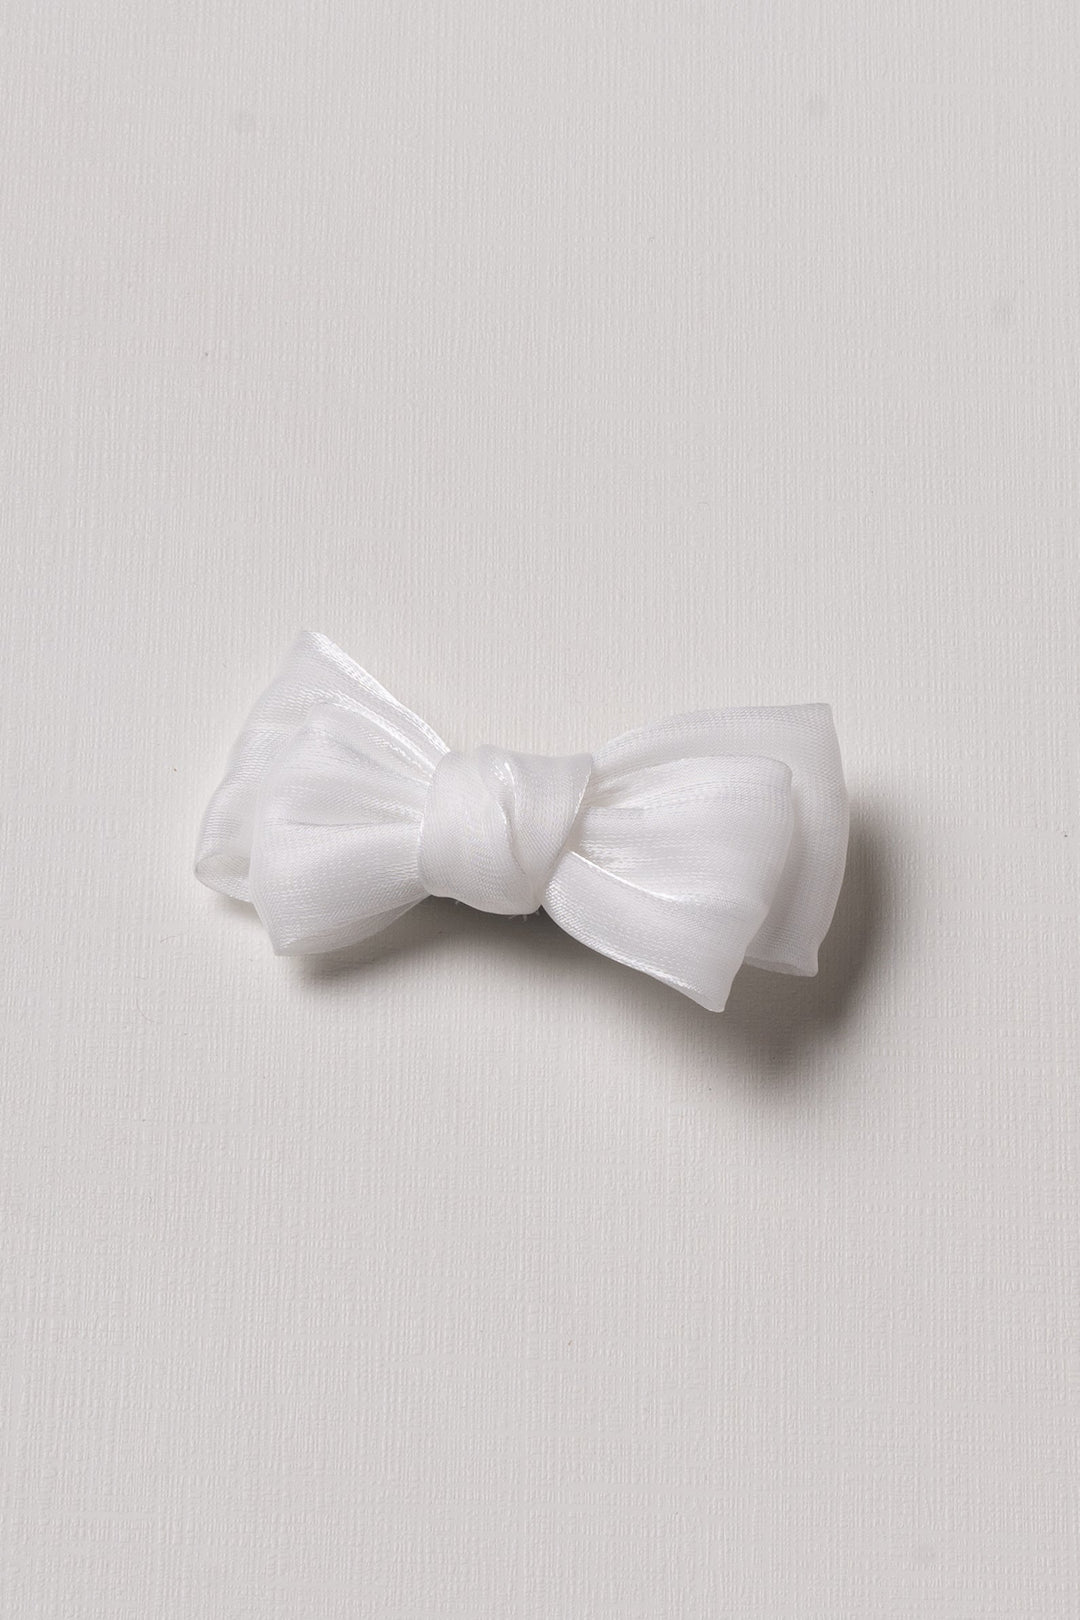 The Nesavu Hair Clip Classic White Bow Hair Clip - Elegance for Every Occasion Nesavu White JHCL77A Elegant Satin Bow Hair Clip for Girls | Unique Side & Back Styling Accessory | The Nesavu